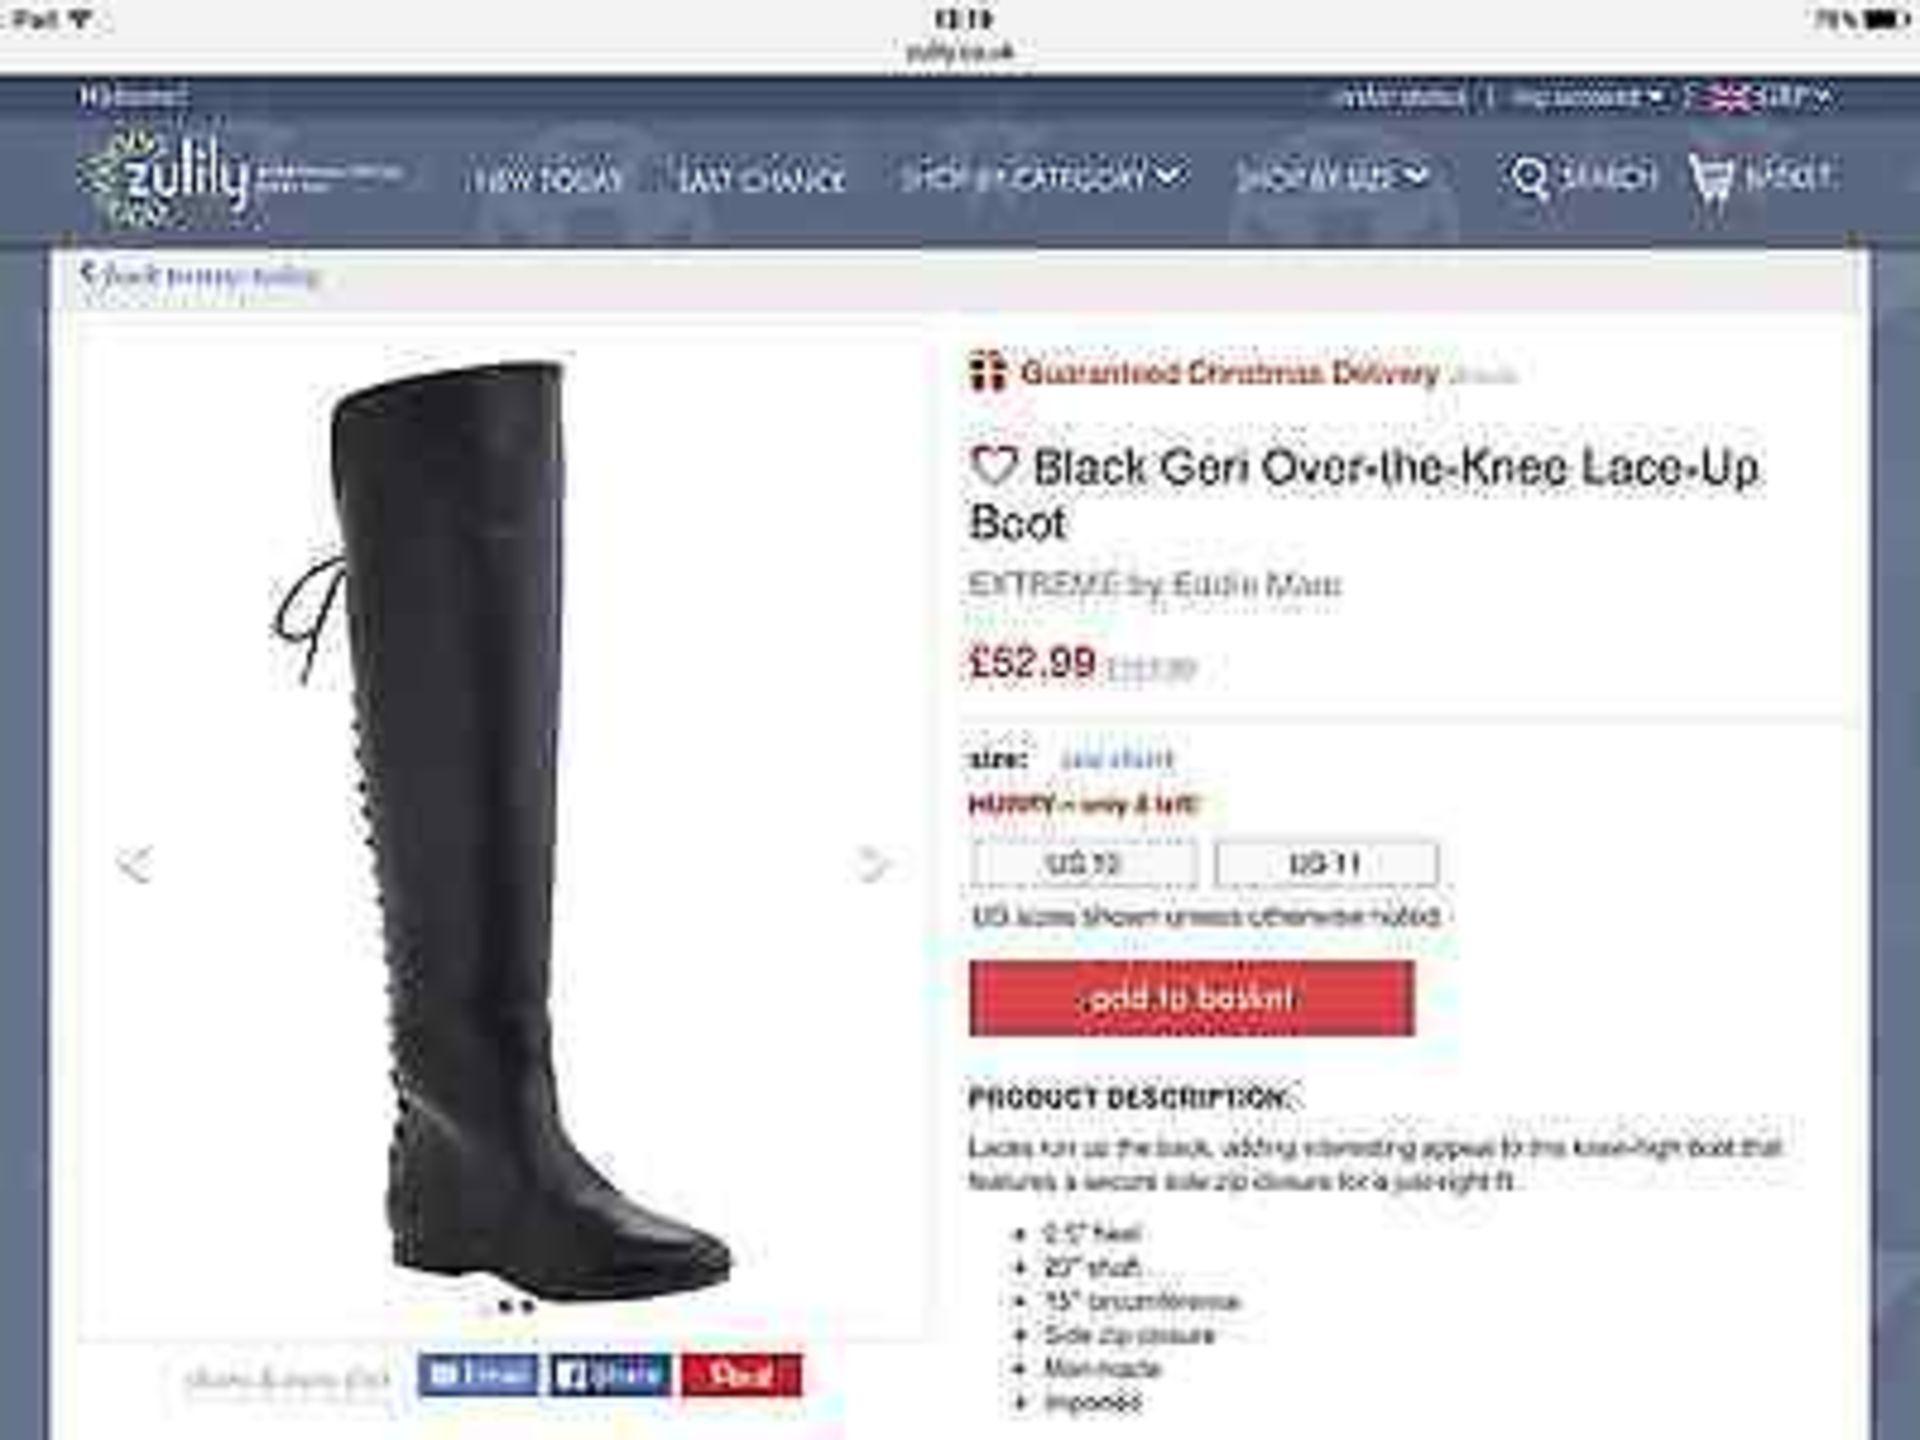 Extreme by Eddie Marc Black Over the Knee Geriatric Boot, Size 6, RRP £127.99 (New with box) - Image 4 of 4